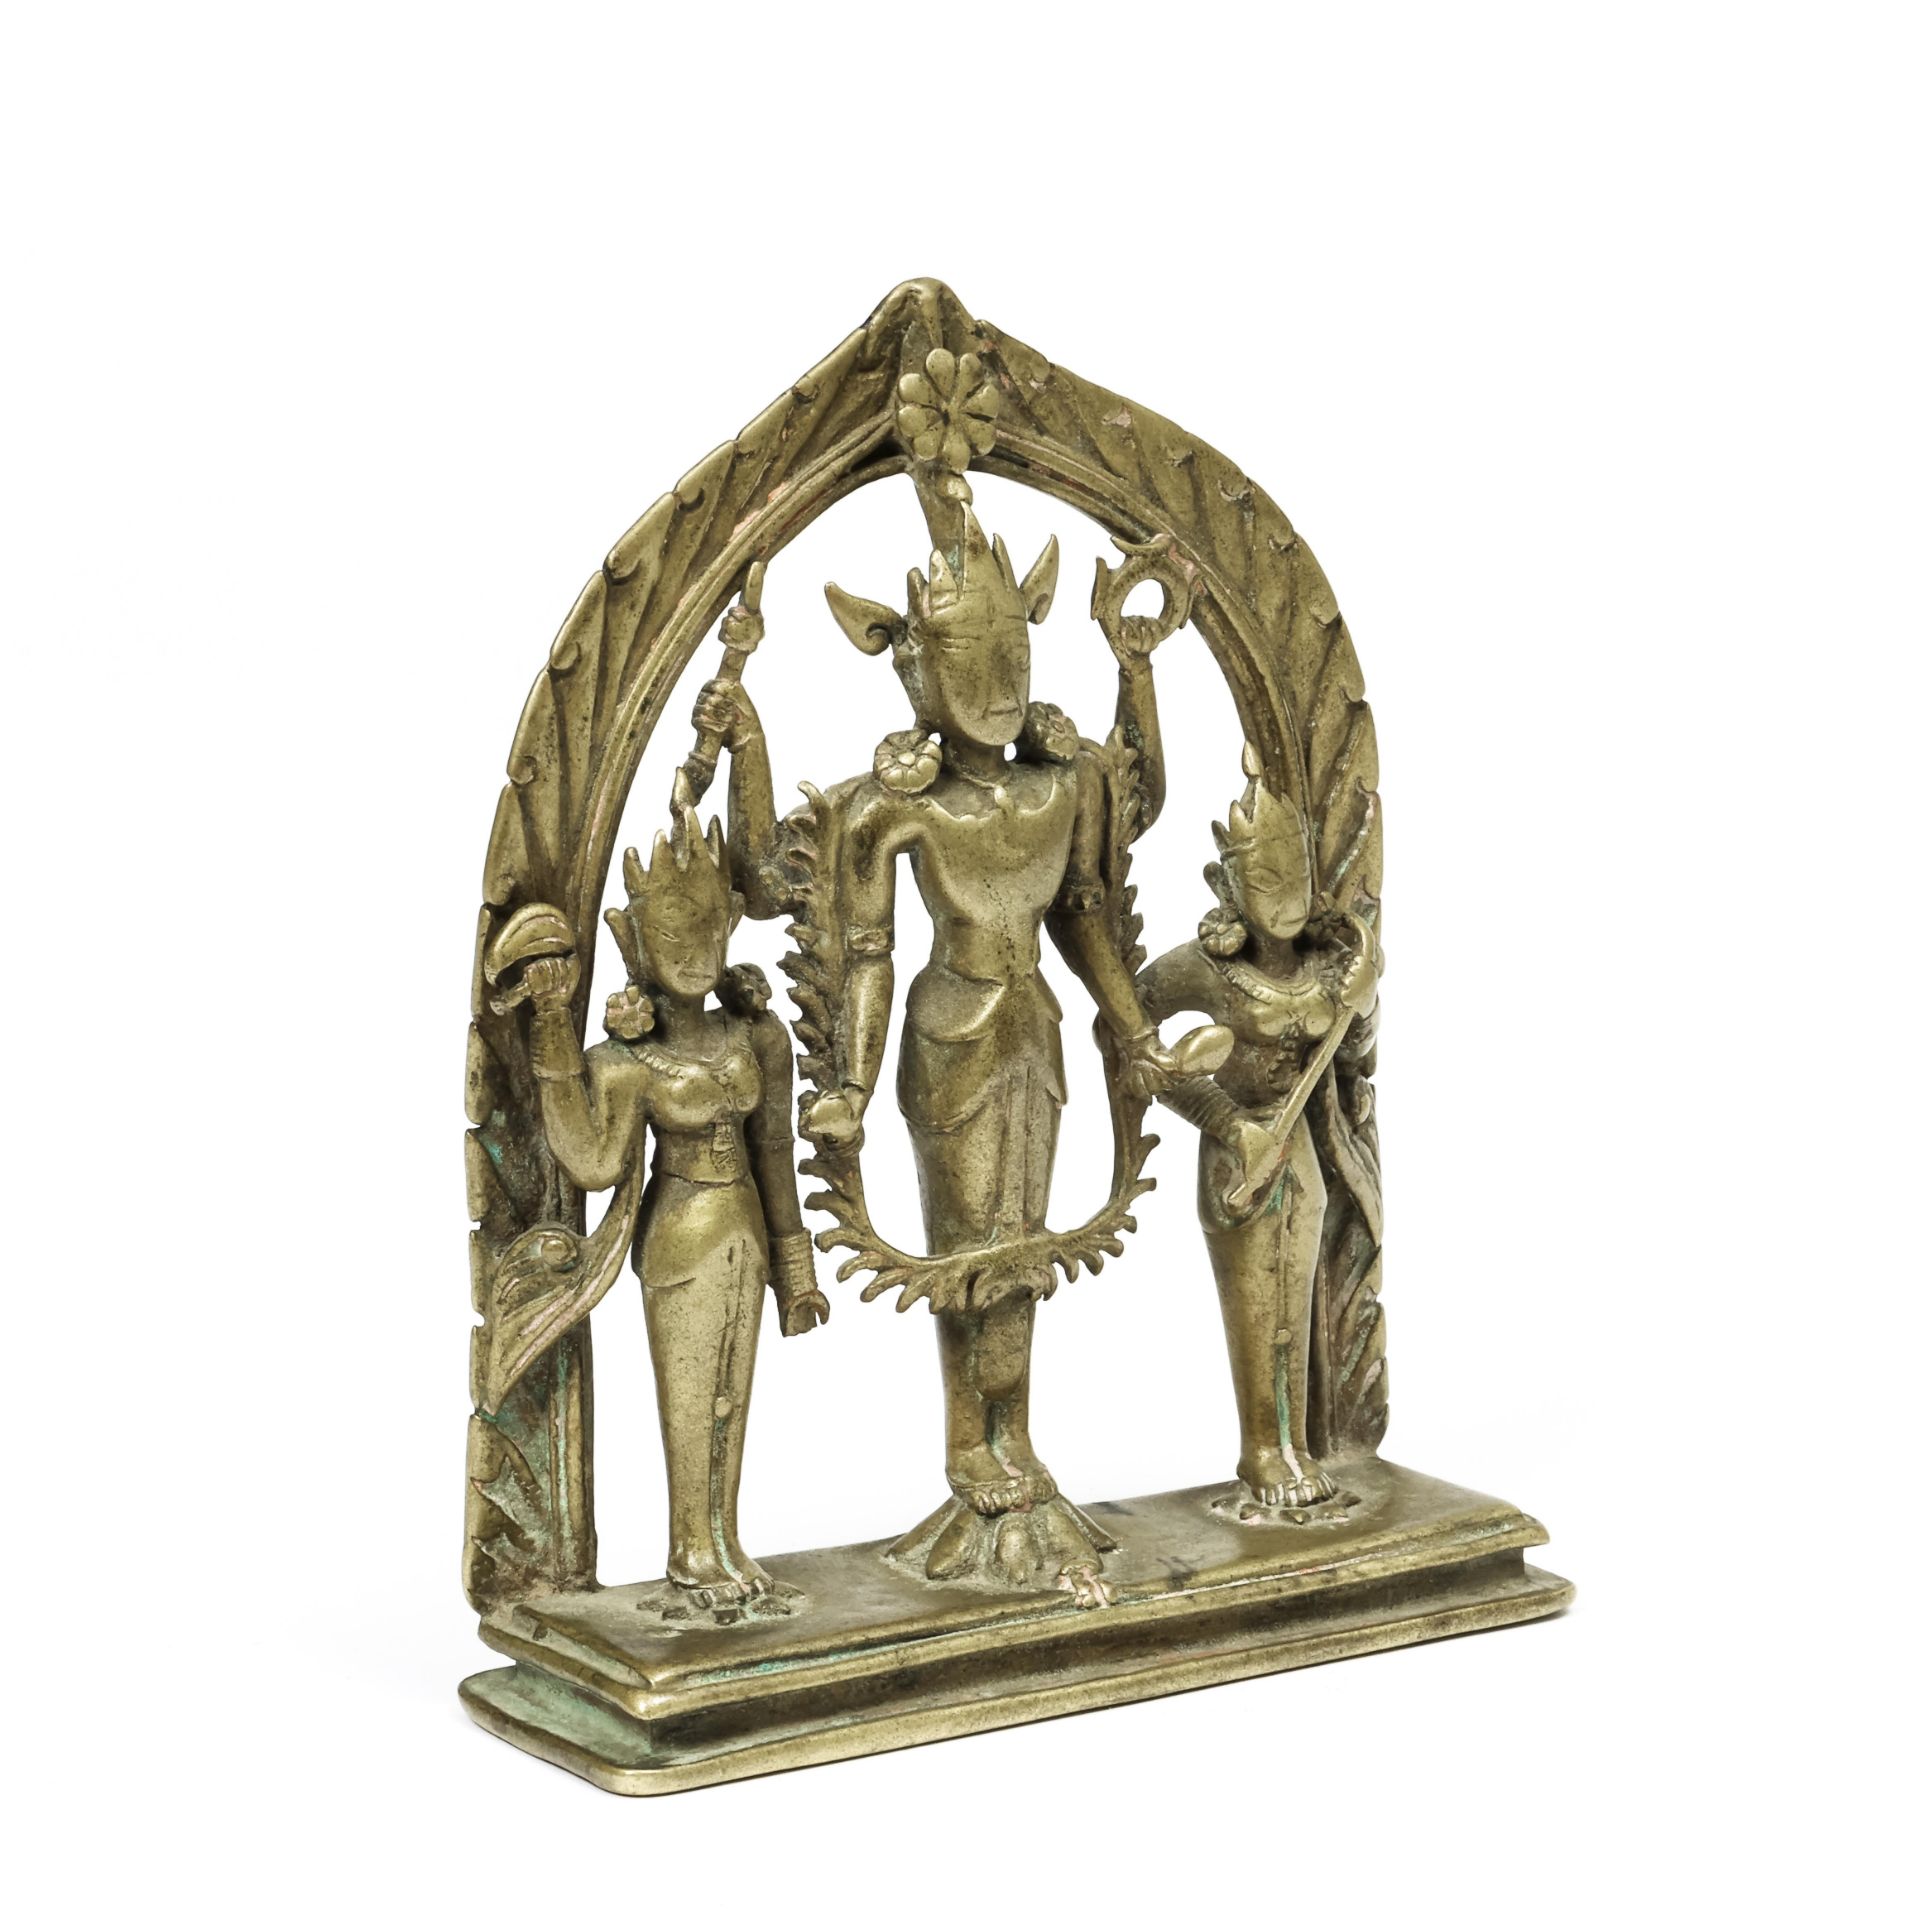 North West India, Himichal Pradesh, a brass altar, 19th century, - Image 4 of 4